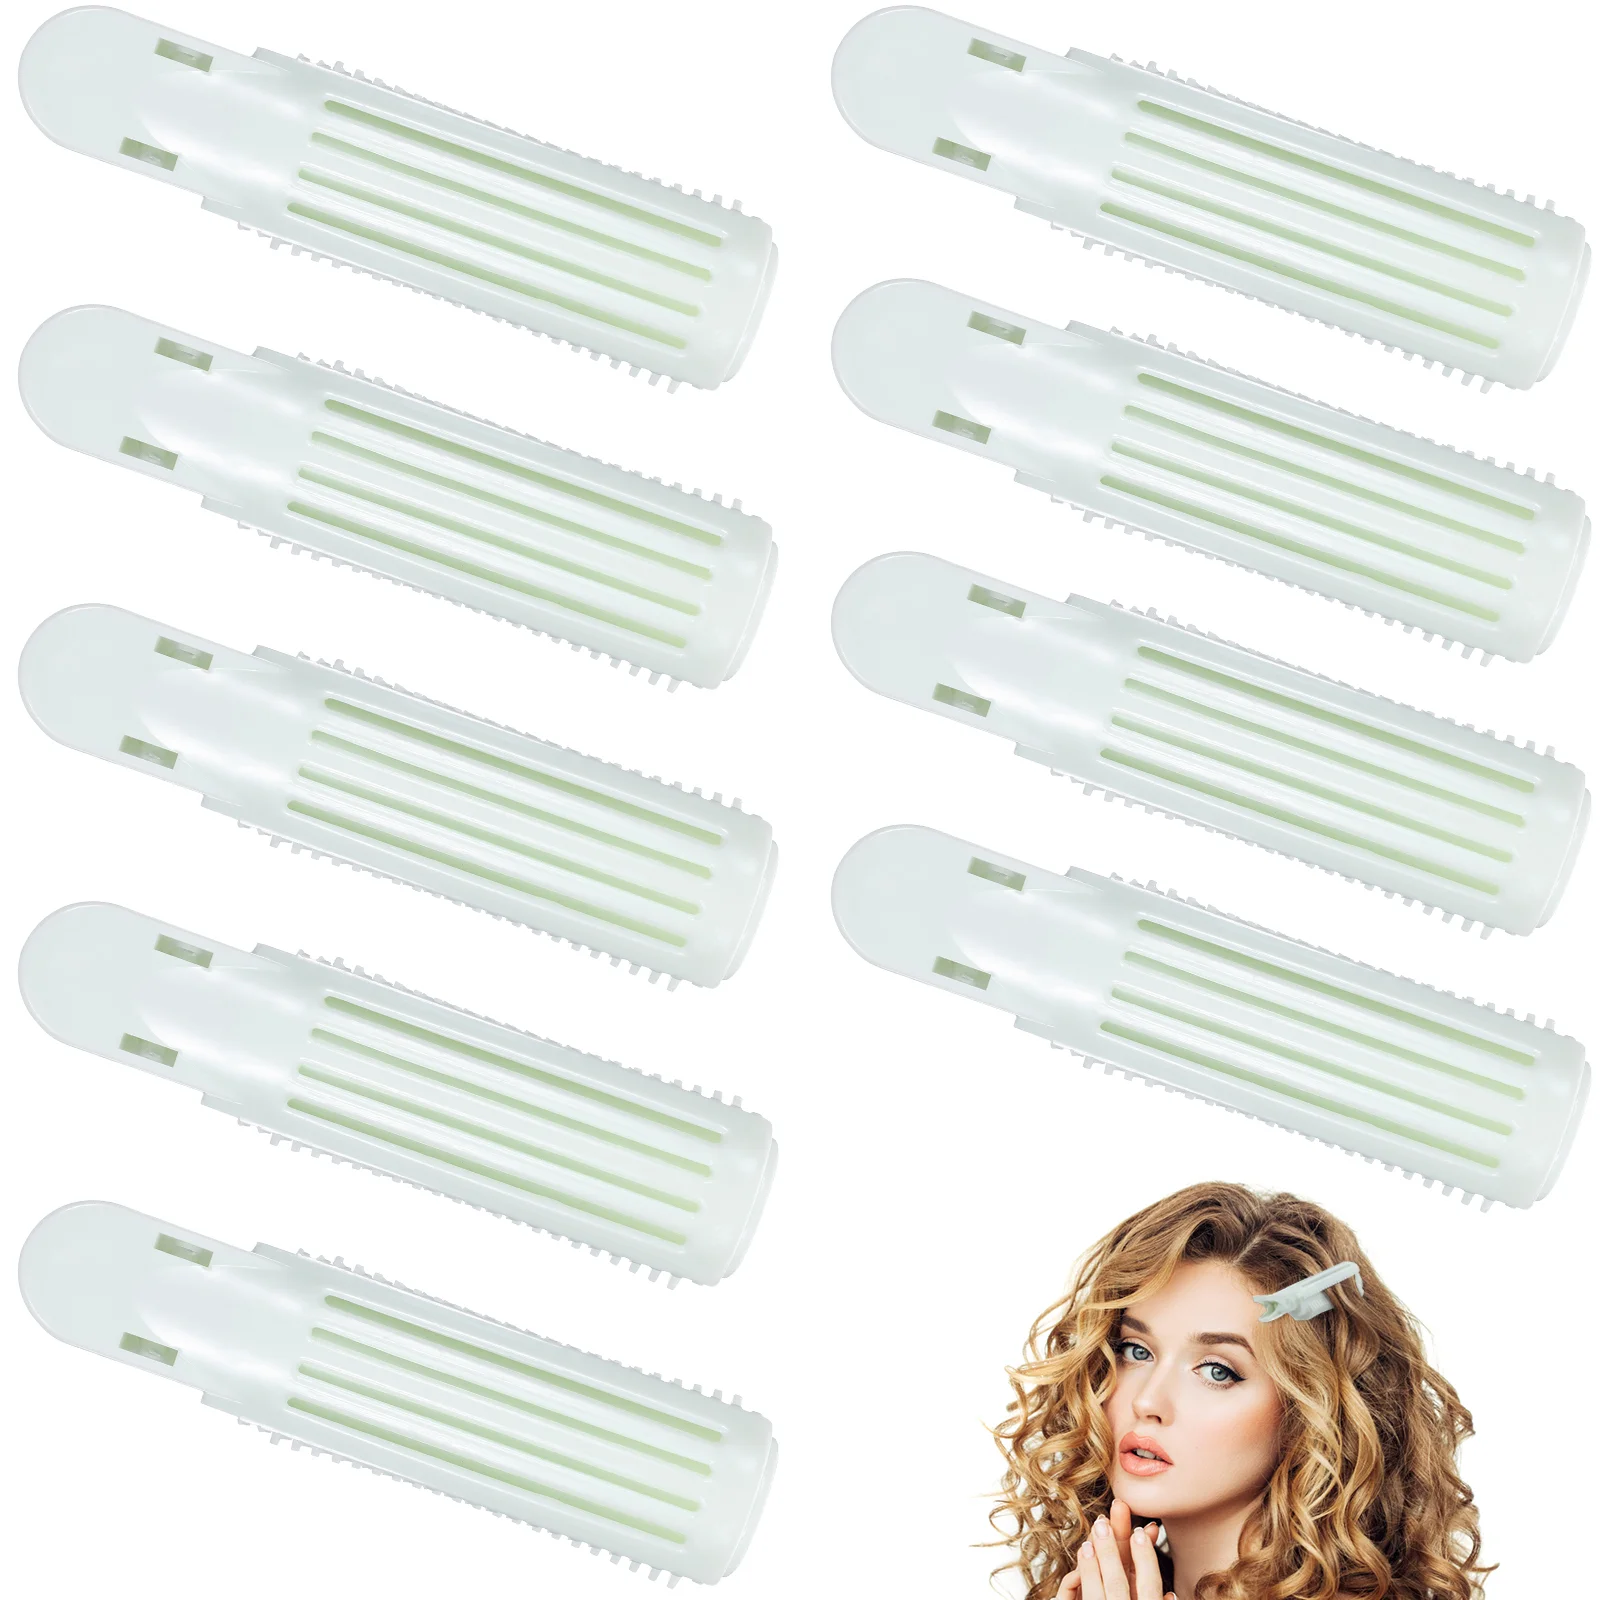 10 Pcs Curlers Bangs Clips Root for Curly Hair Volume Rollers Barrettes Volumizing Adjustable 200ep adjustable volume inductive noisy environments cable finder tone generator cable tester